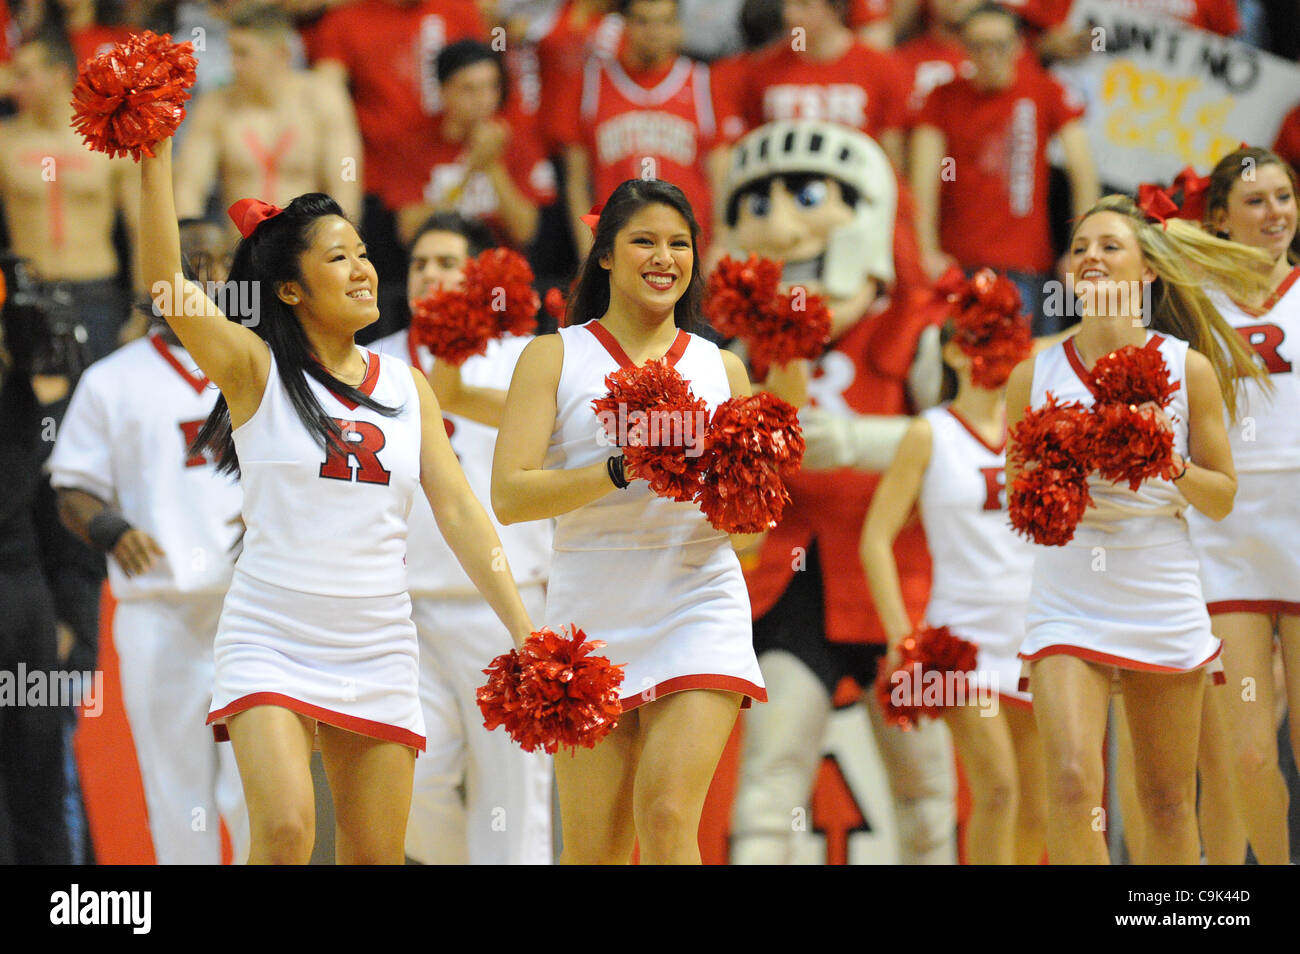 Jan. 16, 2012 - Piscataway, New Jersey, U.S - Rutgers Scarlet Knights cheerleaders take the court during first half Big East NCAA college basketball action between Rutgers and Notre Dame at the Louis Brown Athletic Center in Piscataway, N.J. Rutgers leads 39-31 at halftime. (Credit Image: © Will Sch Stock Photo